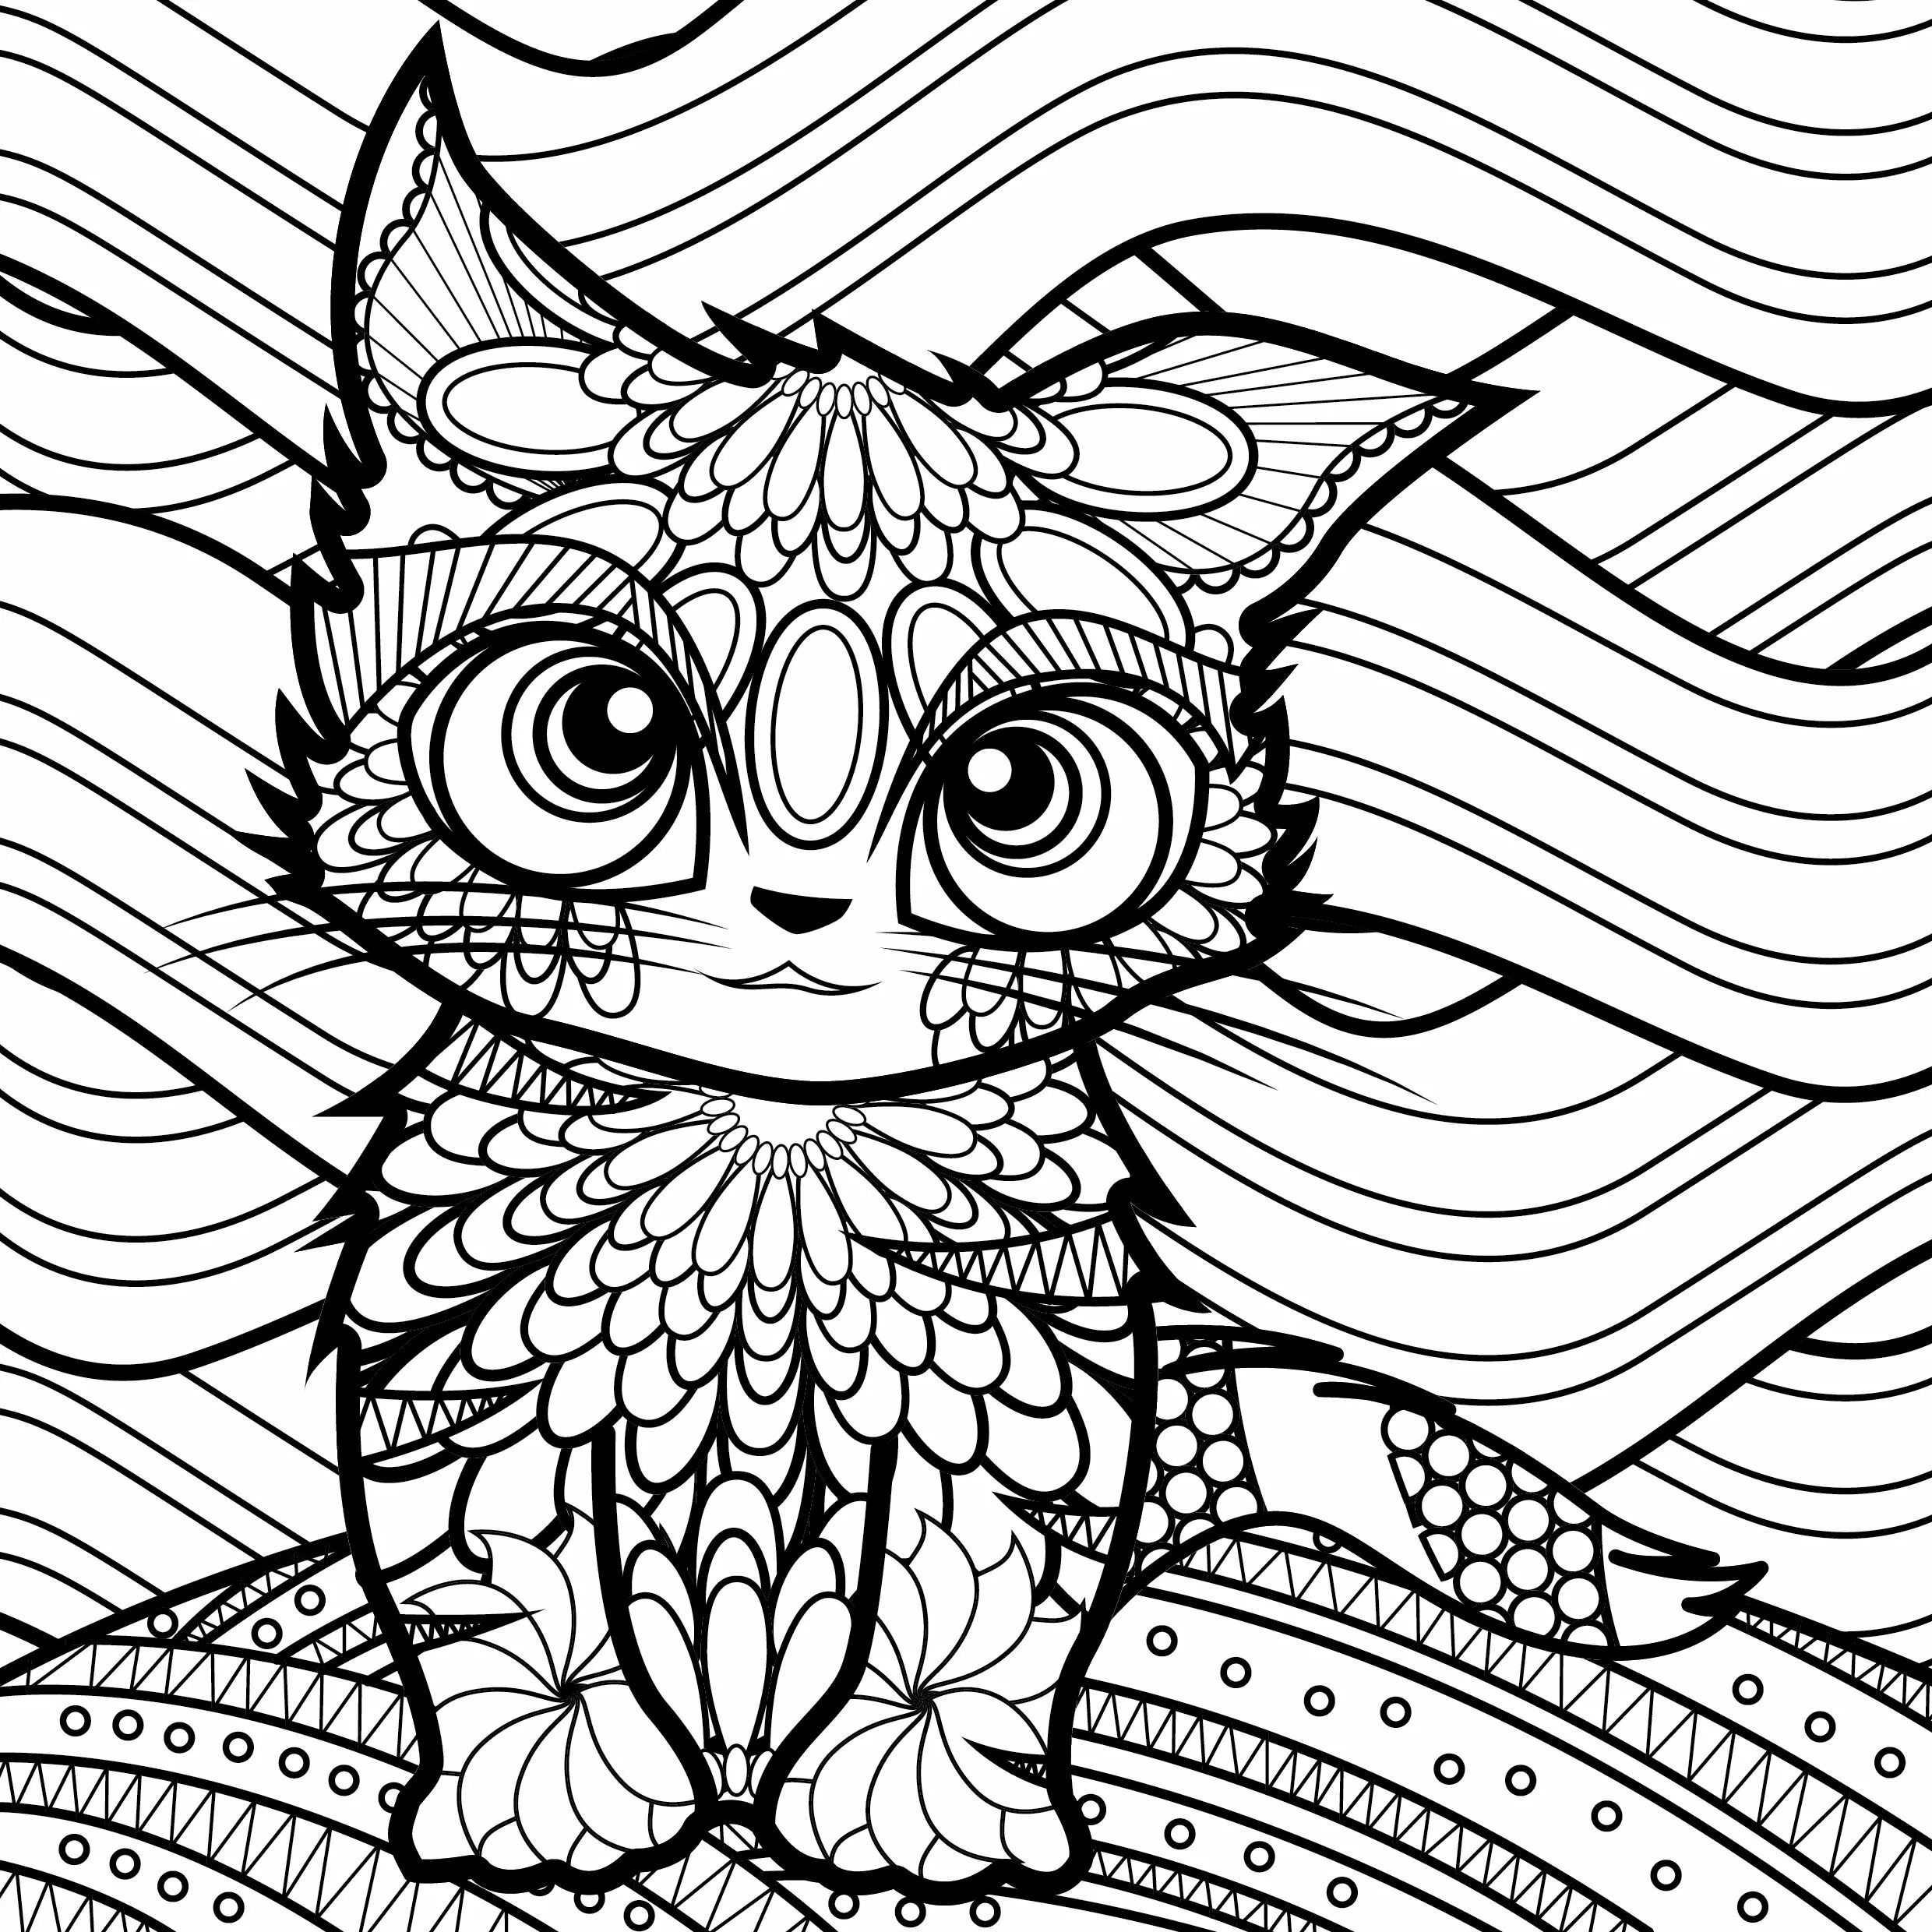 Dazzlingly patterned cat coloring page